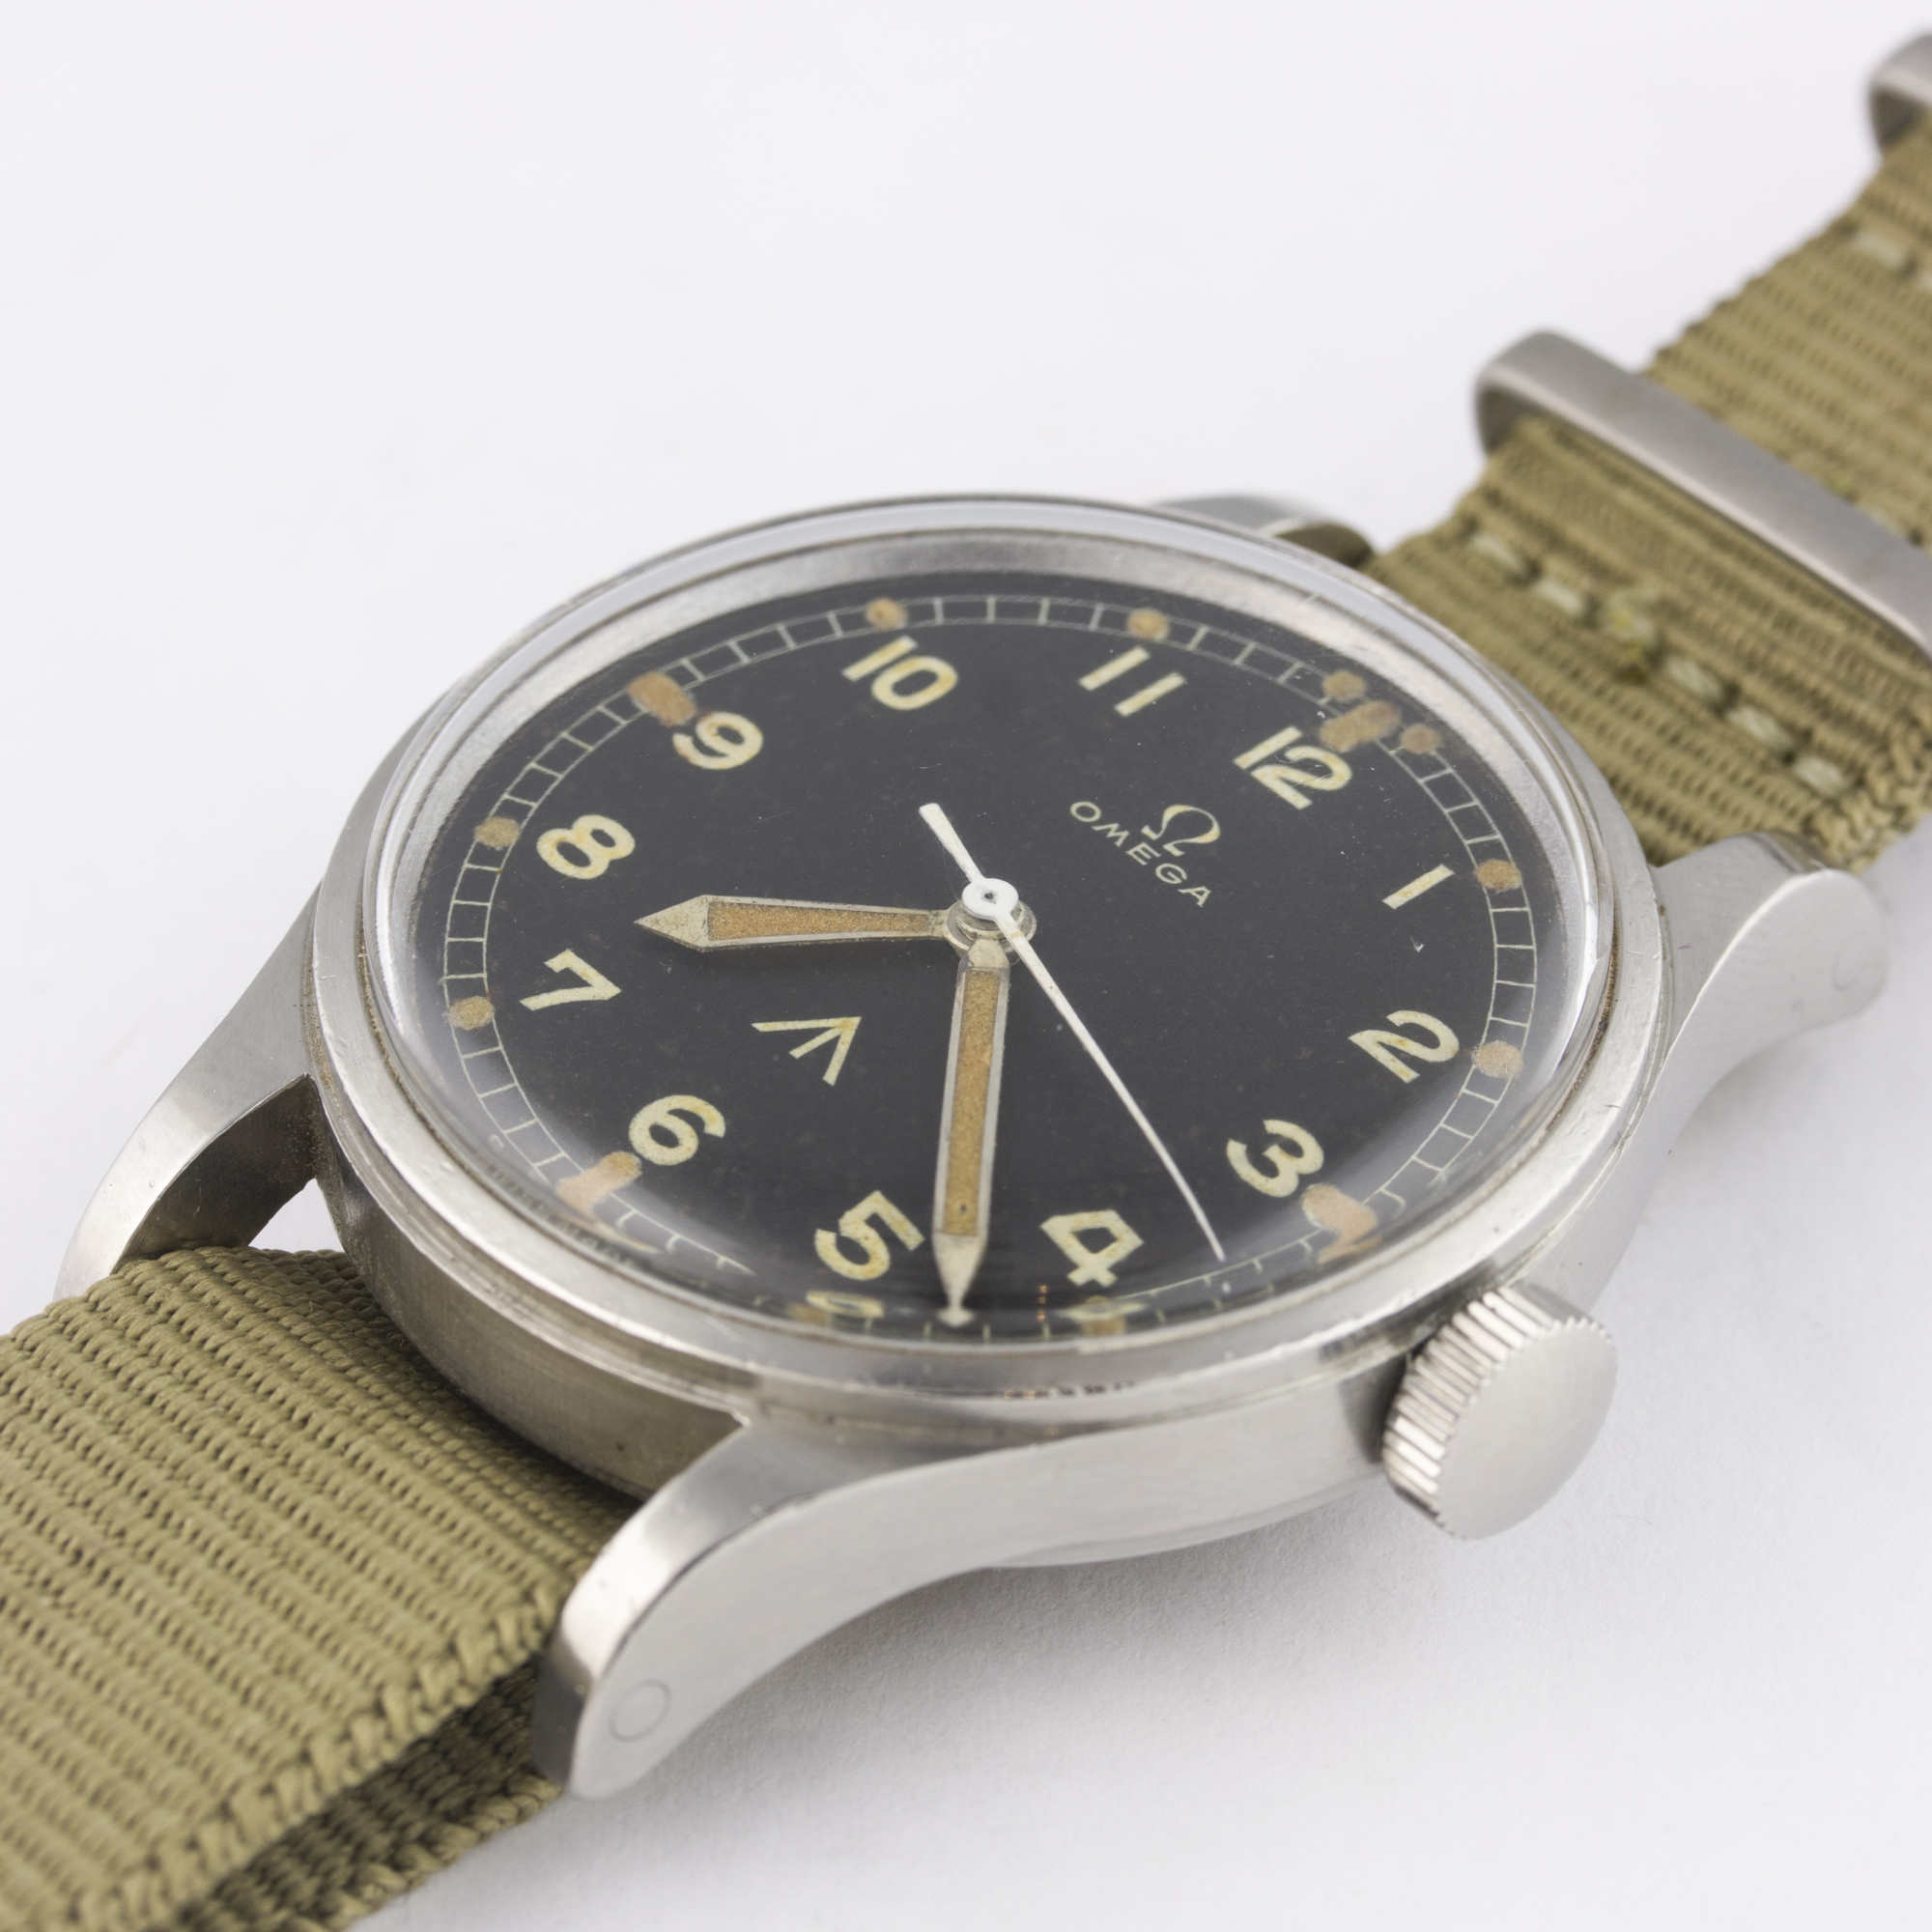 A VERY RARE GENTLEMAN'S STAINLESS STEEL BRITISH MILITARY OMEGA RAF "THIN ARROW" PILOTS WRIST WATCH - Image 4 of 9